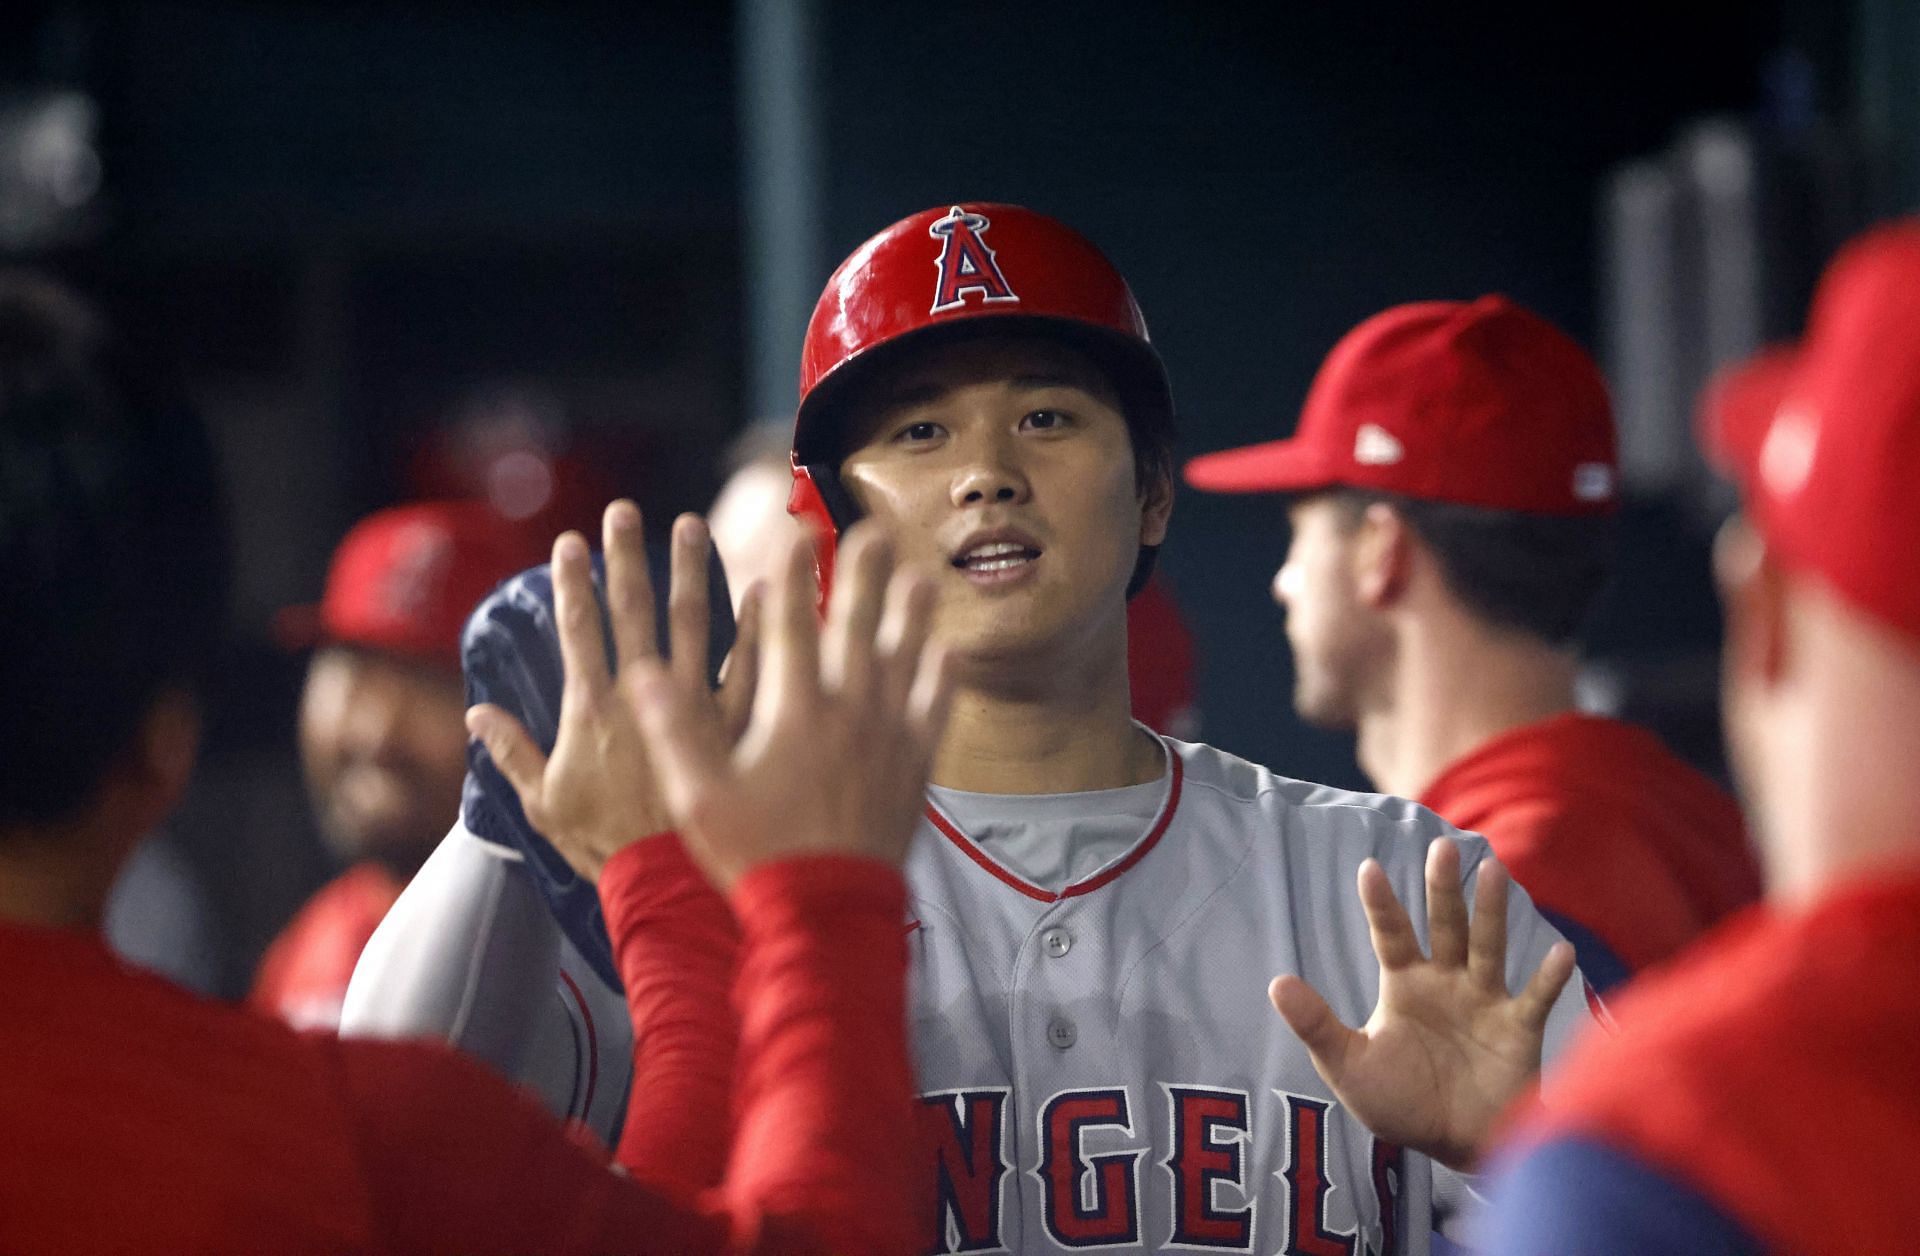 Angels Ohtani had a perfect game through five against the Astros in Houston last night, Wednesday, April 20